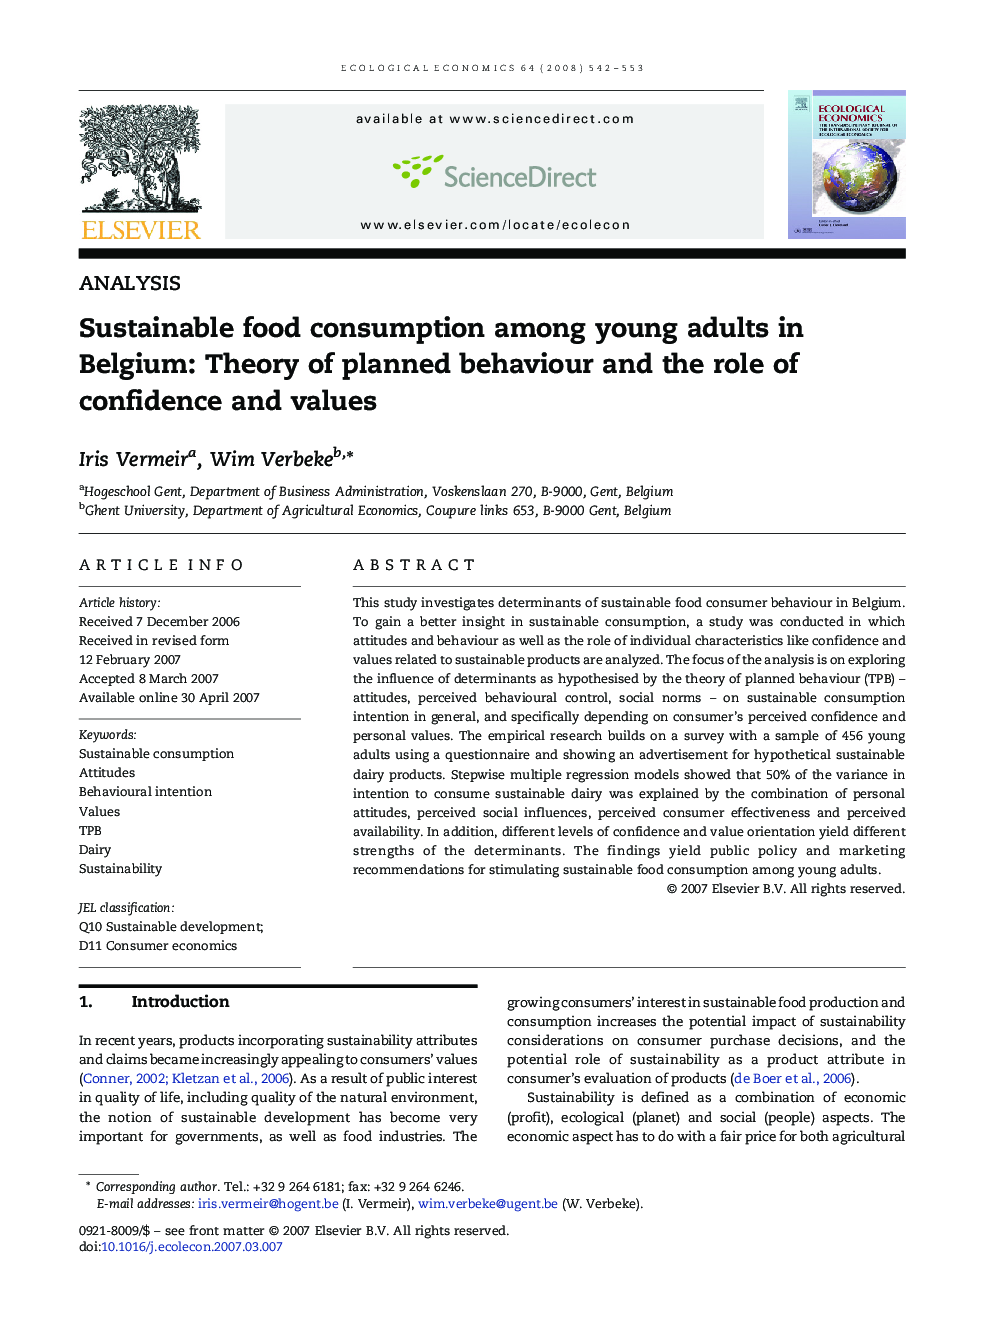 Sustainable food consumption among young adults in Belgium: Theory of planned behaviour and the role of confidence and values